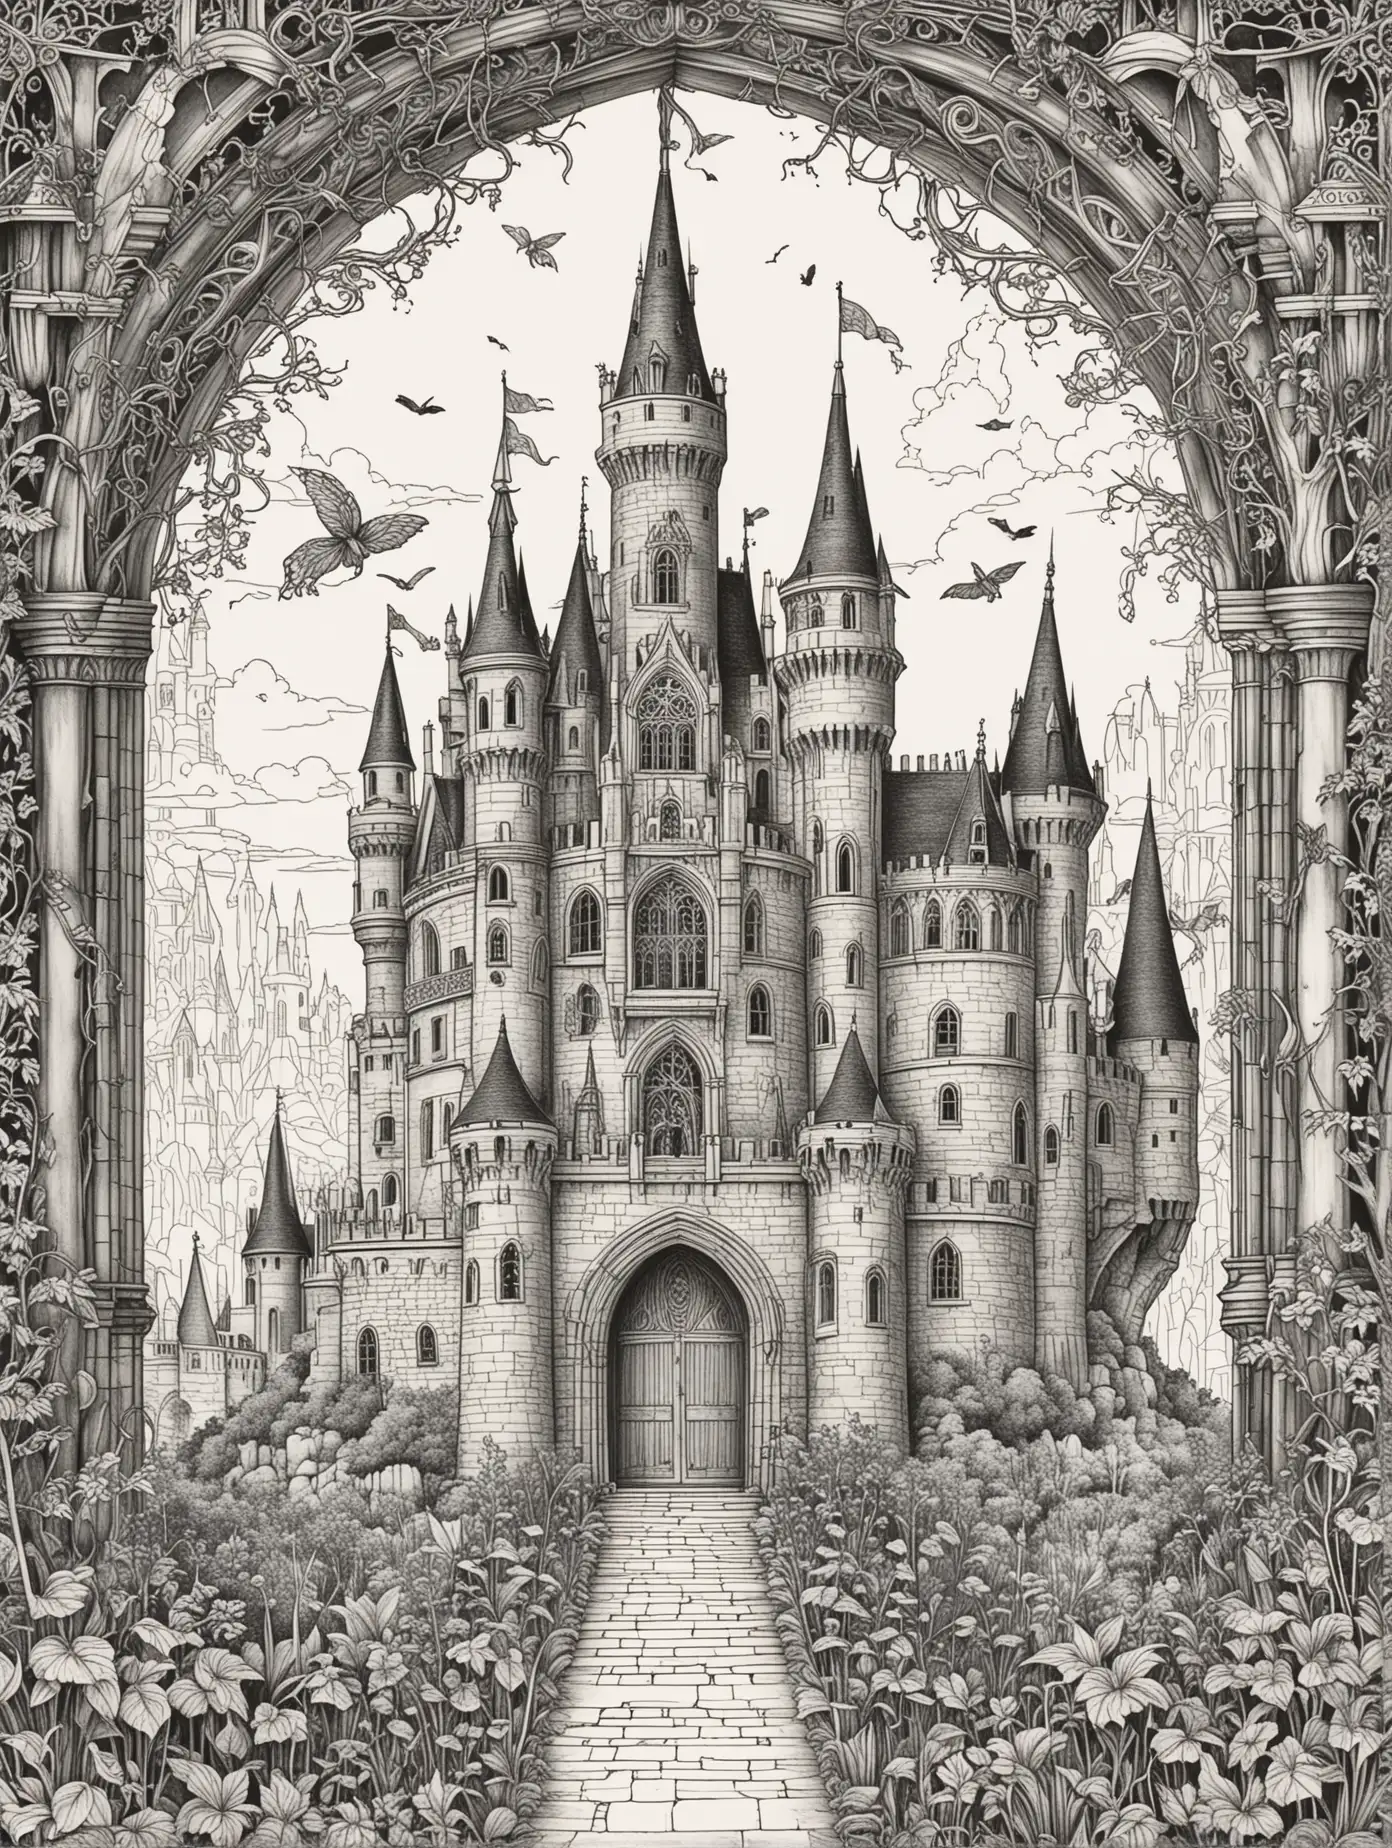 vintage style fairytale colouring book, gothic castle